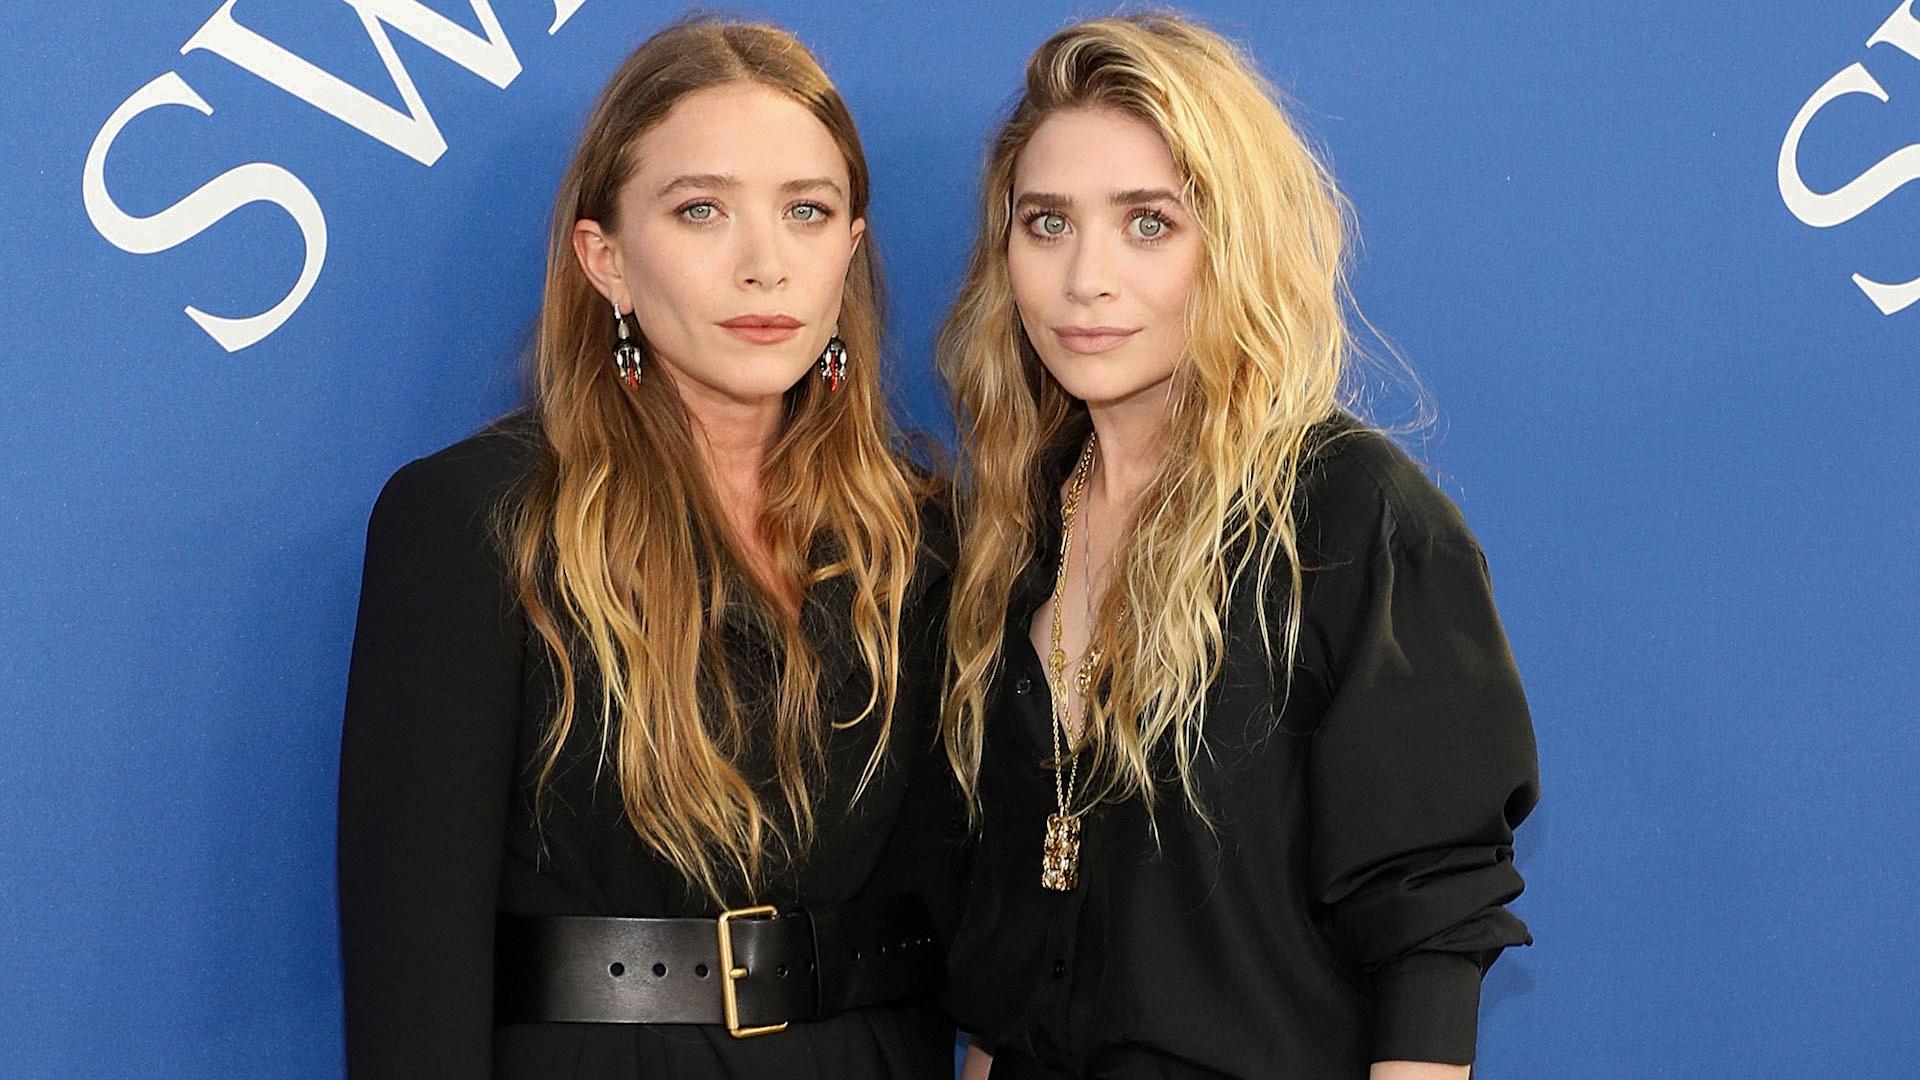 do the olsen twins have twitter